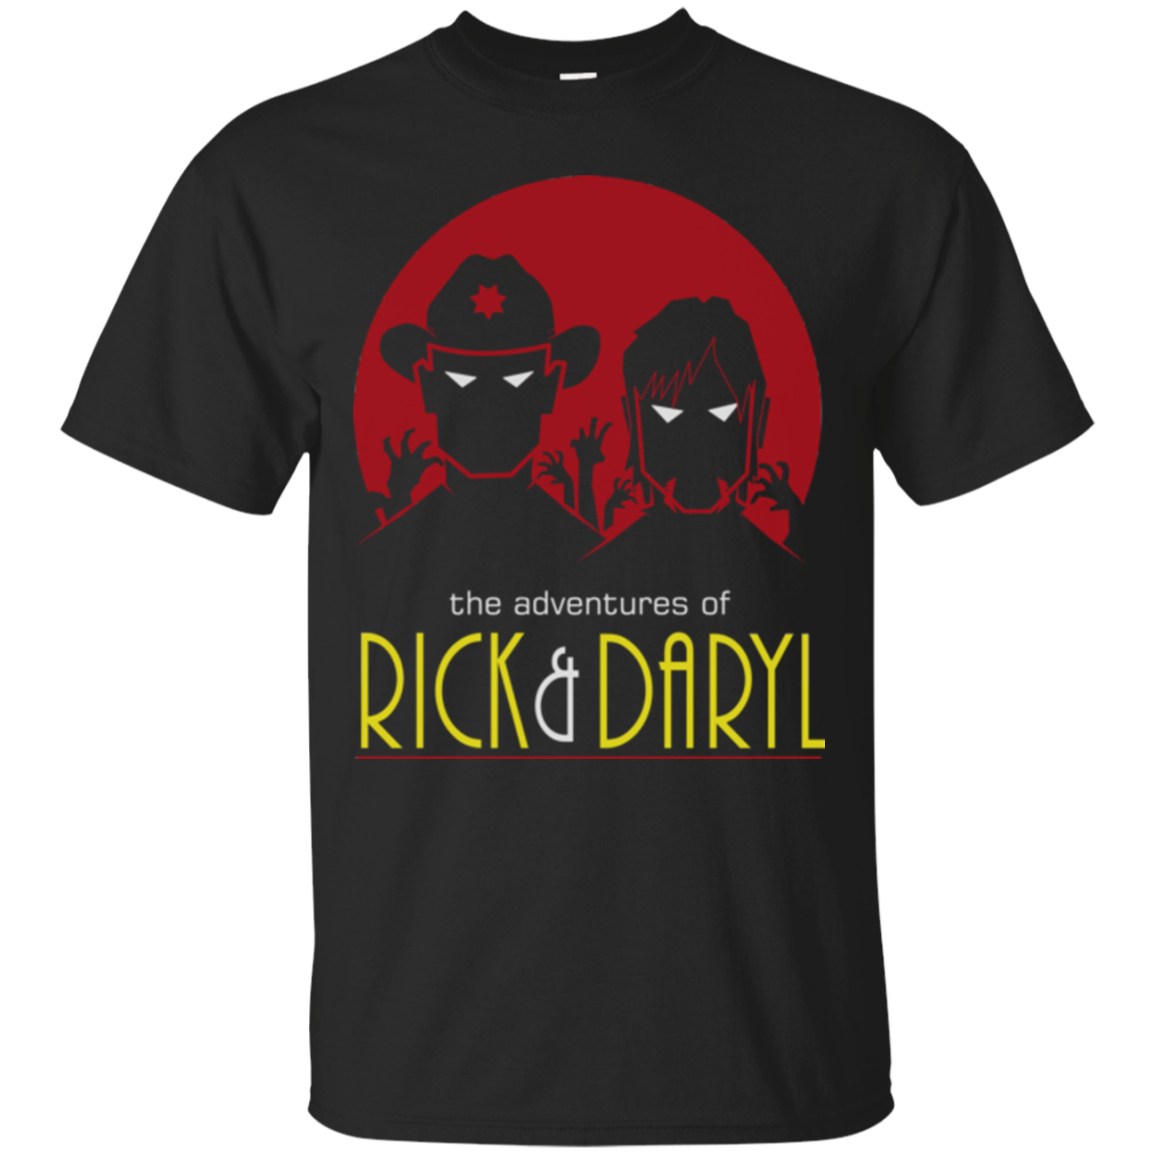 The Adventures of Rick and Daryl T-Shirt